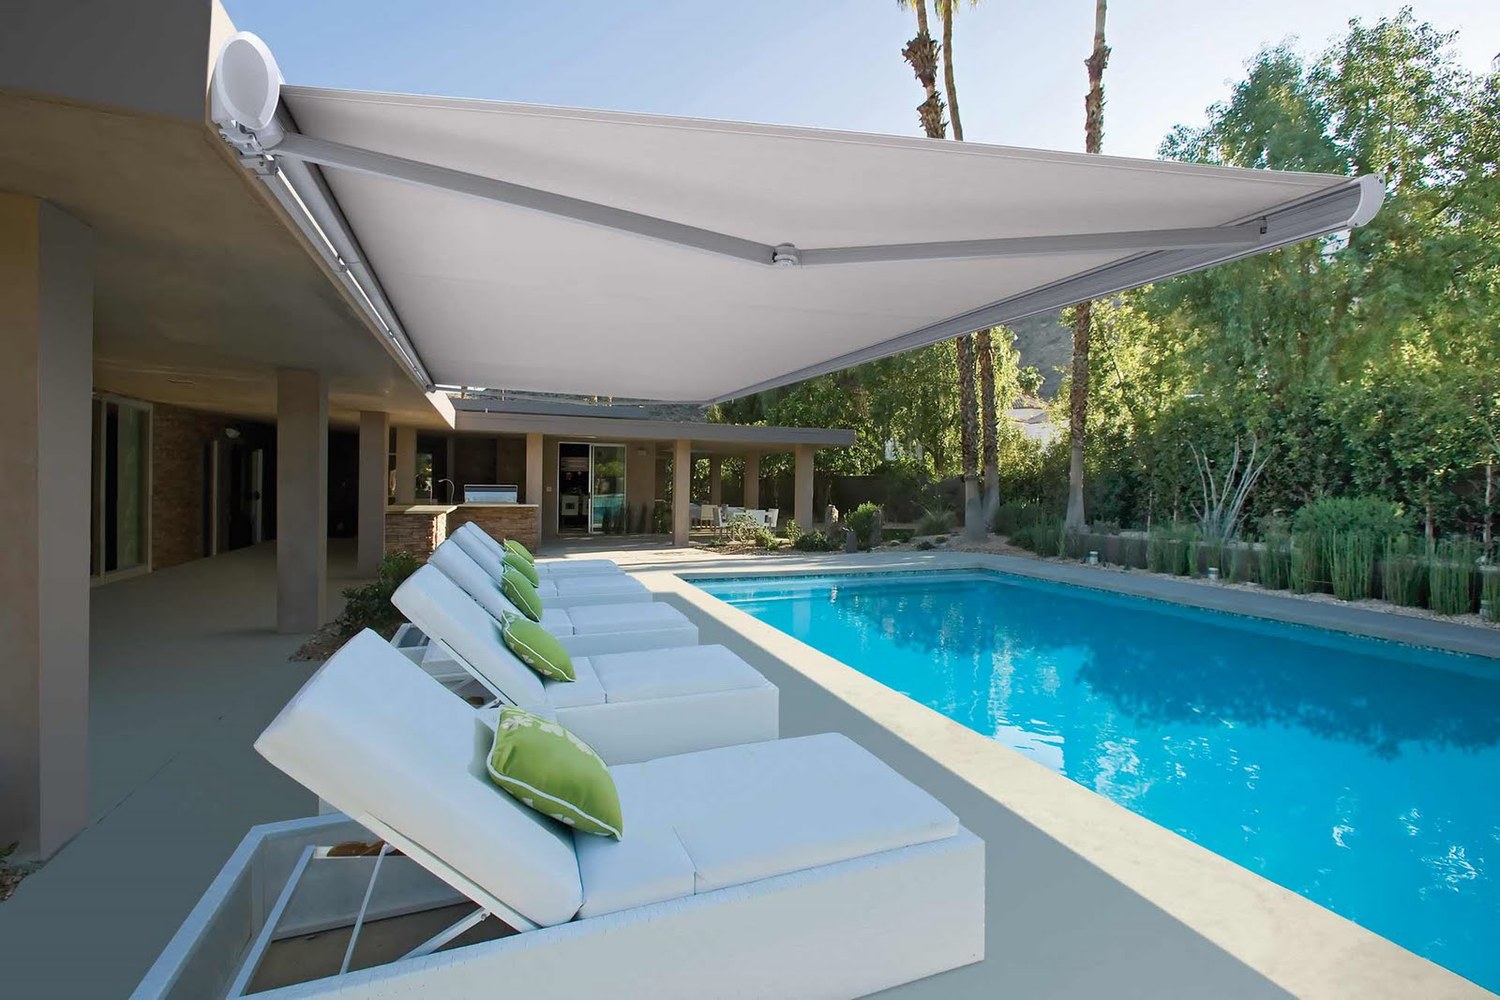 Shoreline Awning Patio Inc Retractable Awnings